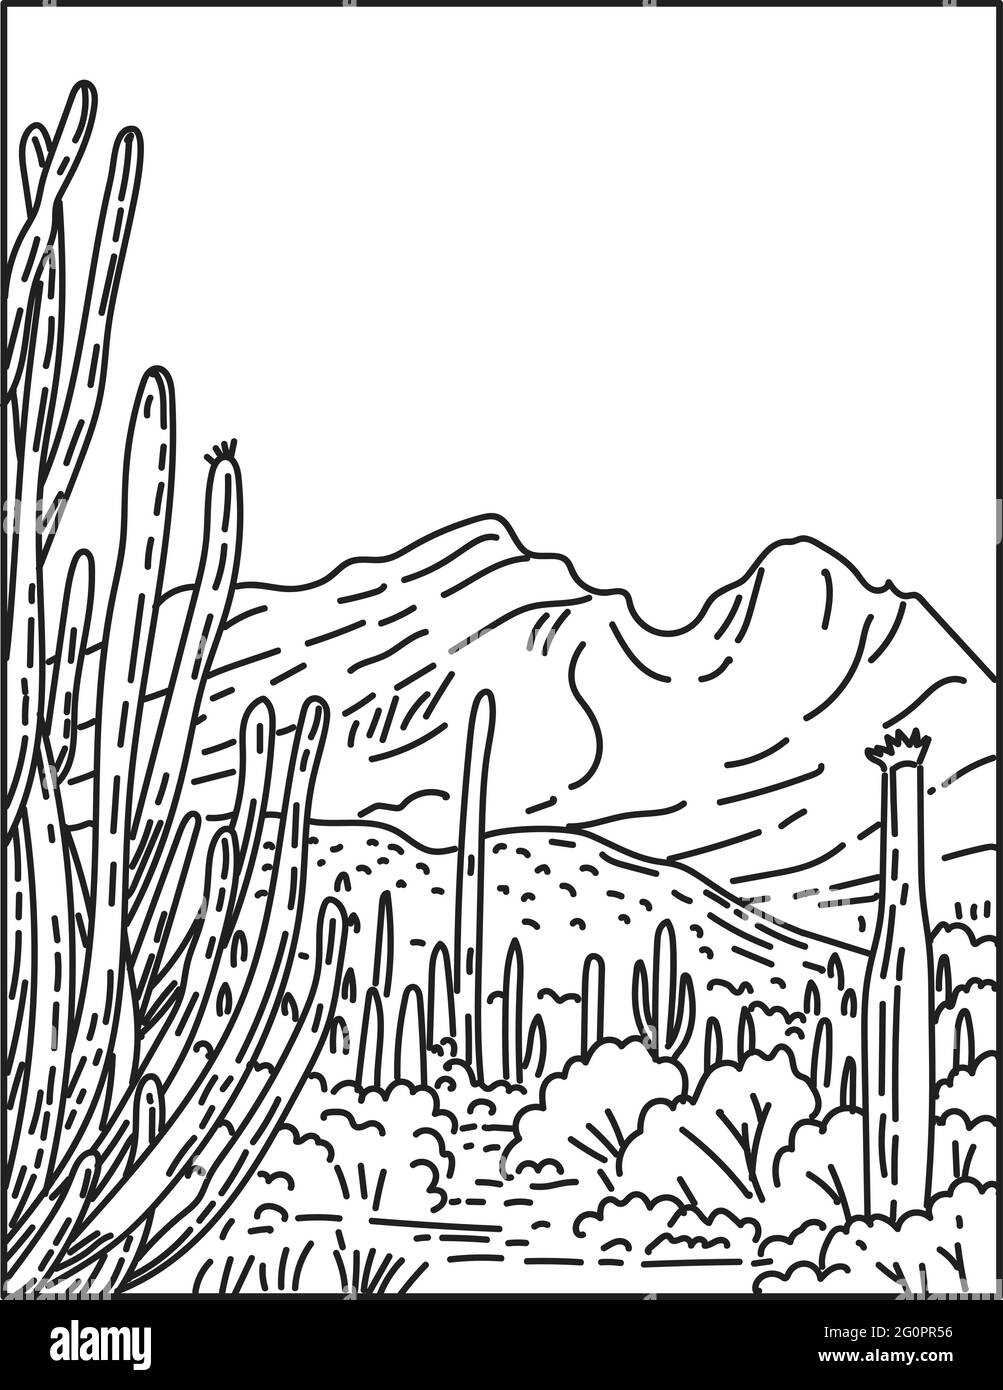 Mono line illustration of Organ Pipe Cactus National Monument in the Sonoran Desert located in extreme southern Arizona, United States done in retro b Stock Vector